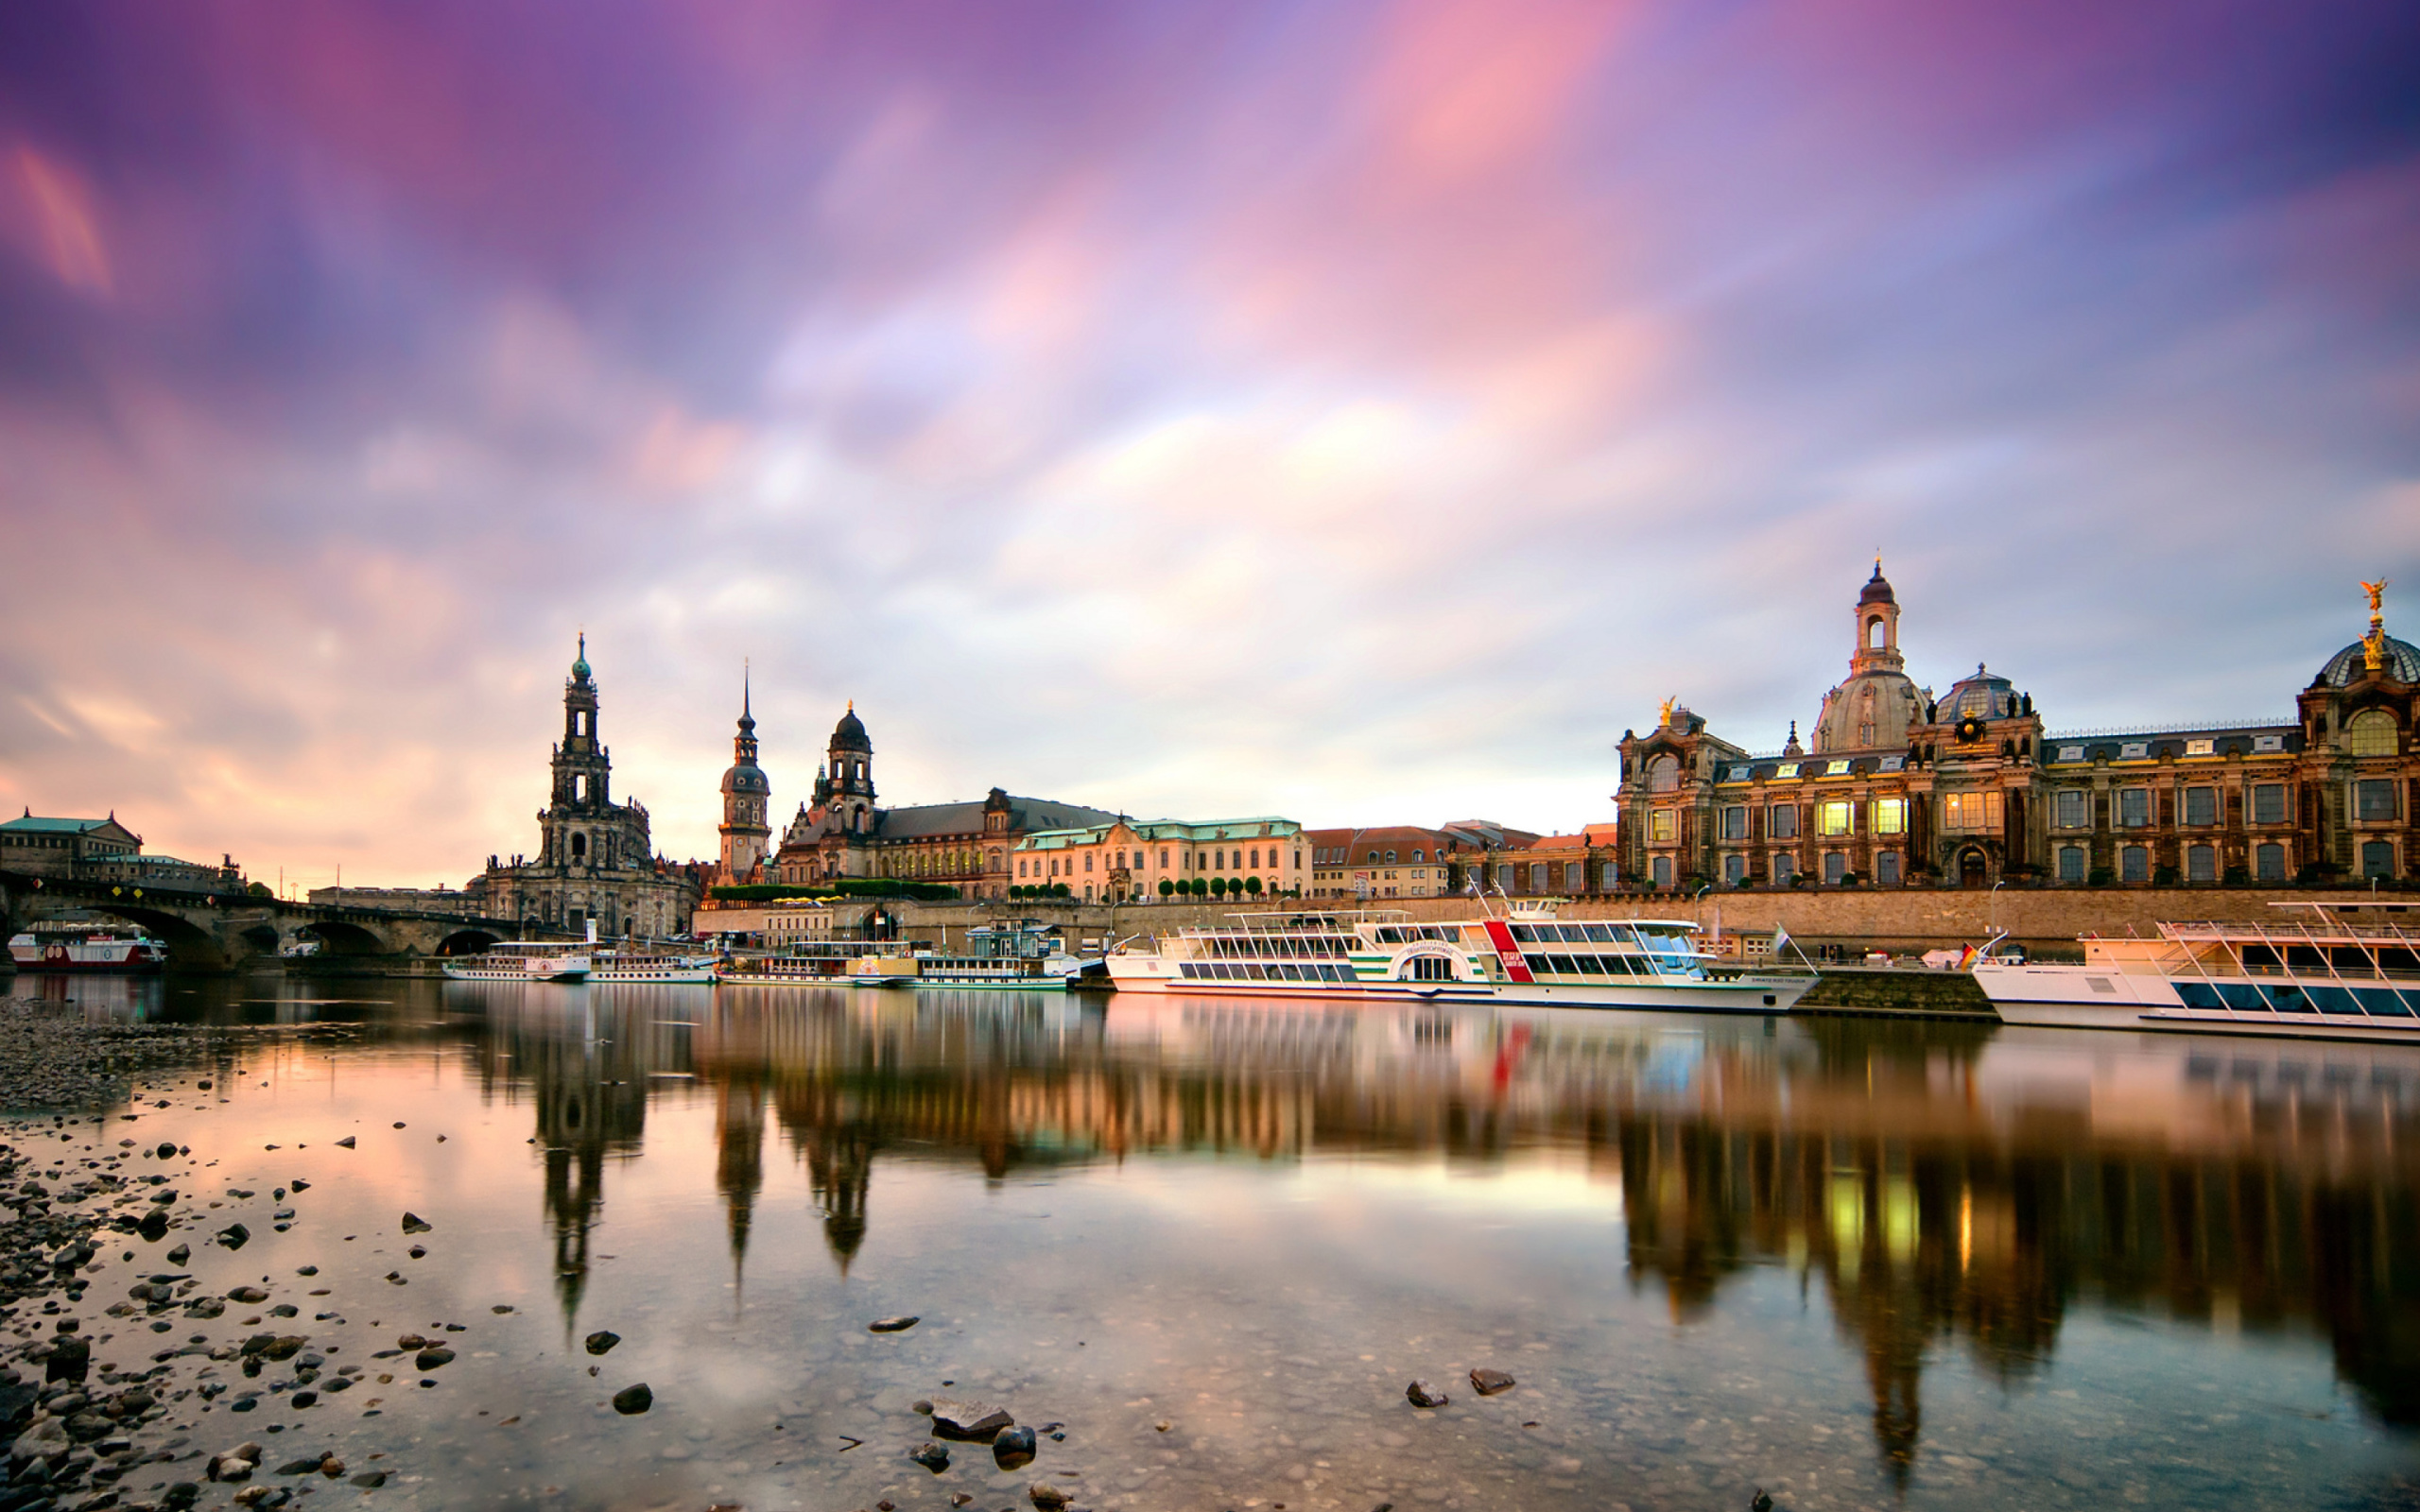 Dresden on Elbe River near Zwinger Palace wallpaper 2560x1600